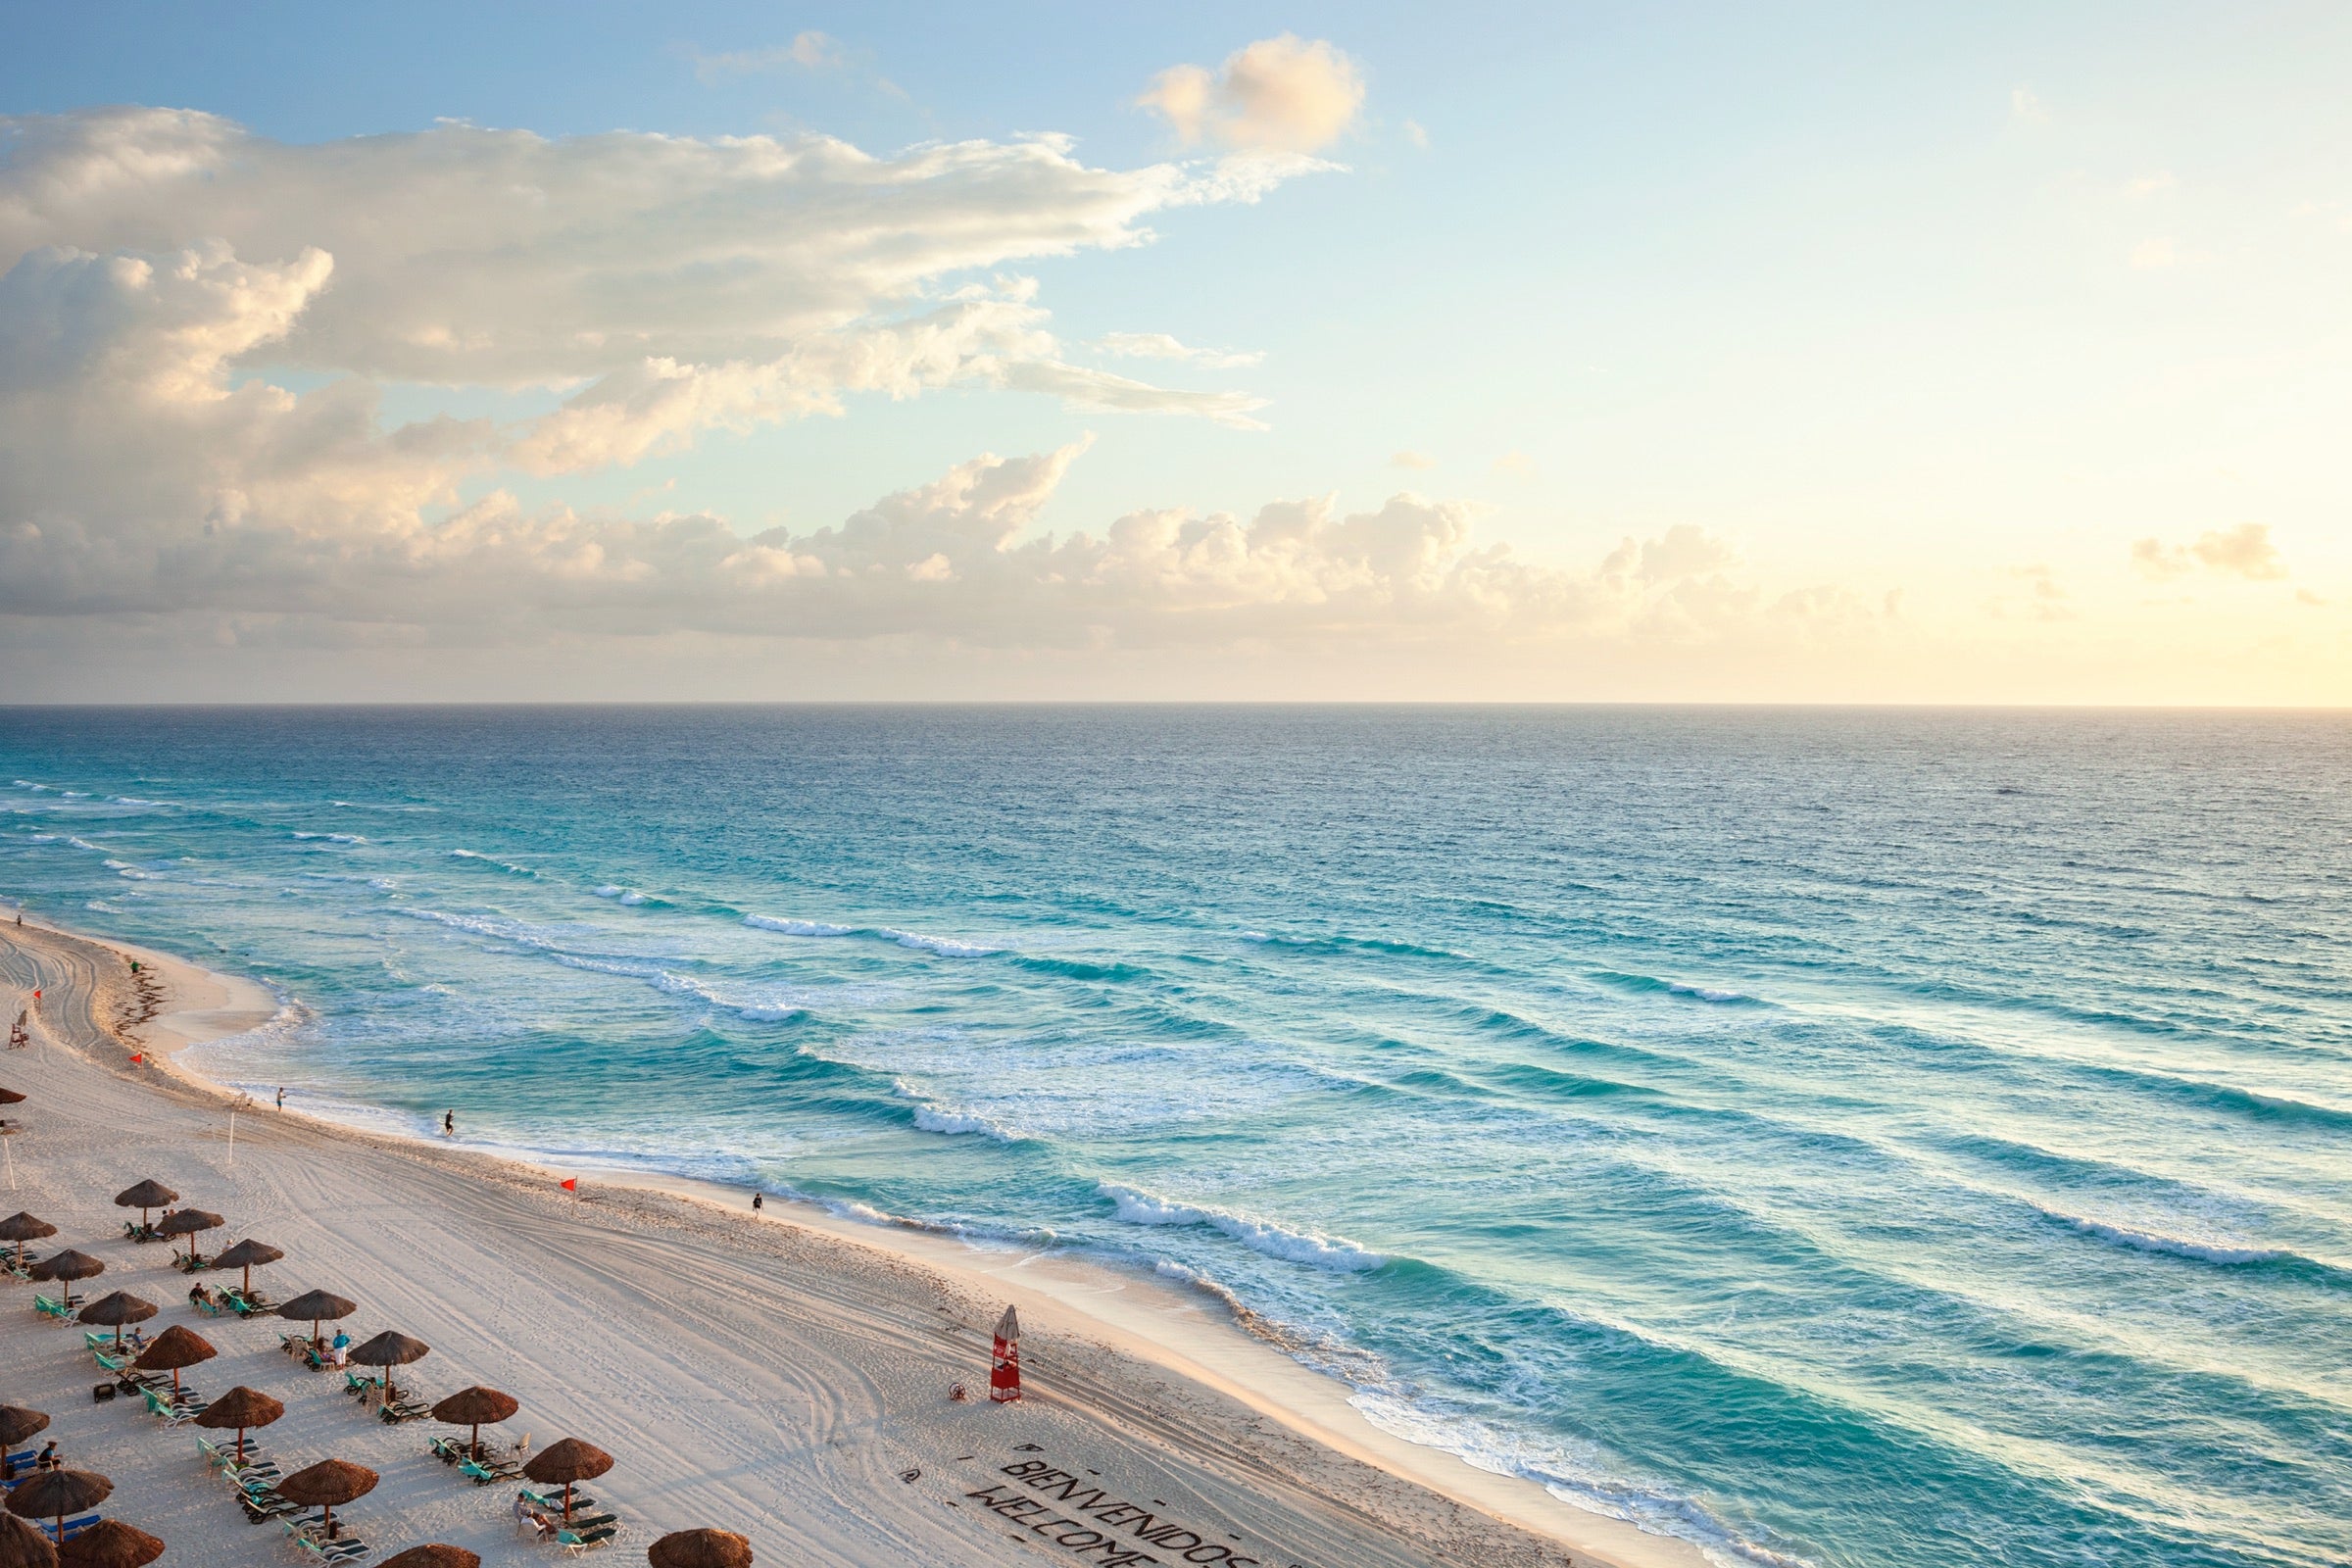 Late summer or autumn vacation? Lots of good deals to Cancun